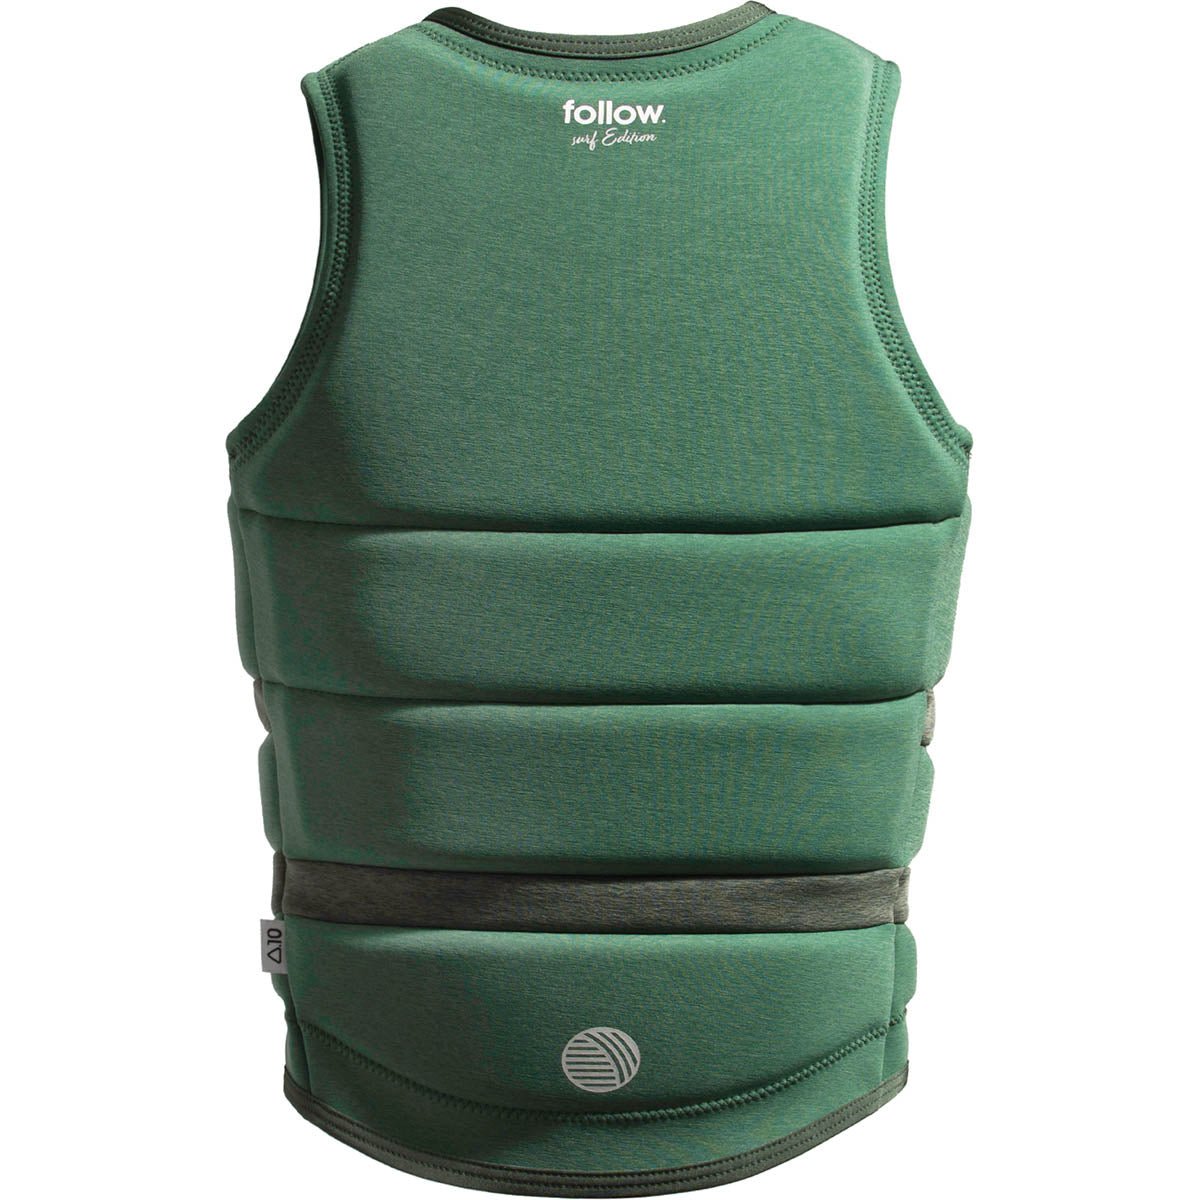 Follow Surf Edition Ladies Comp Wake Vest in Olive - BoardCo